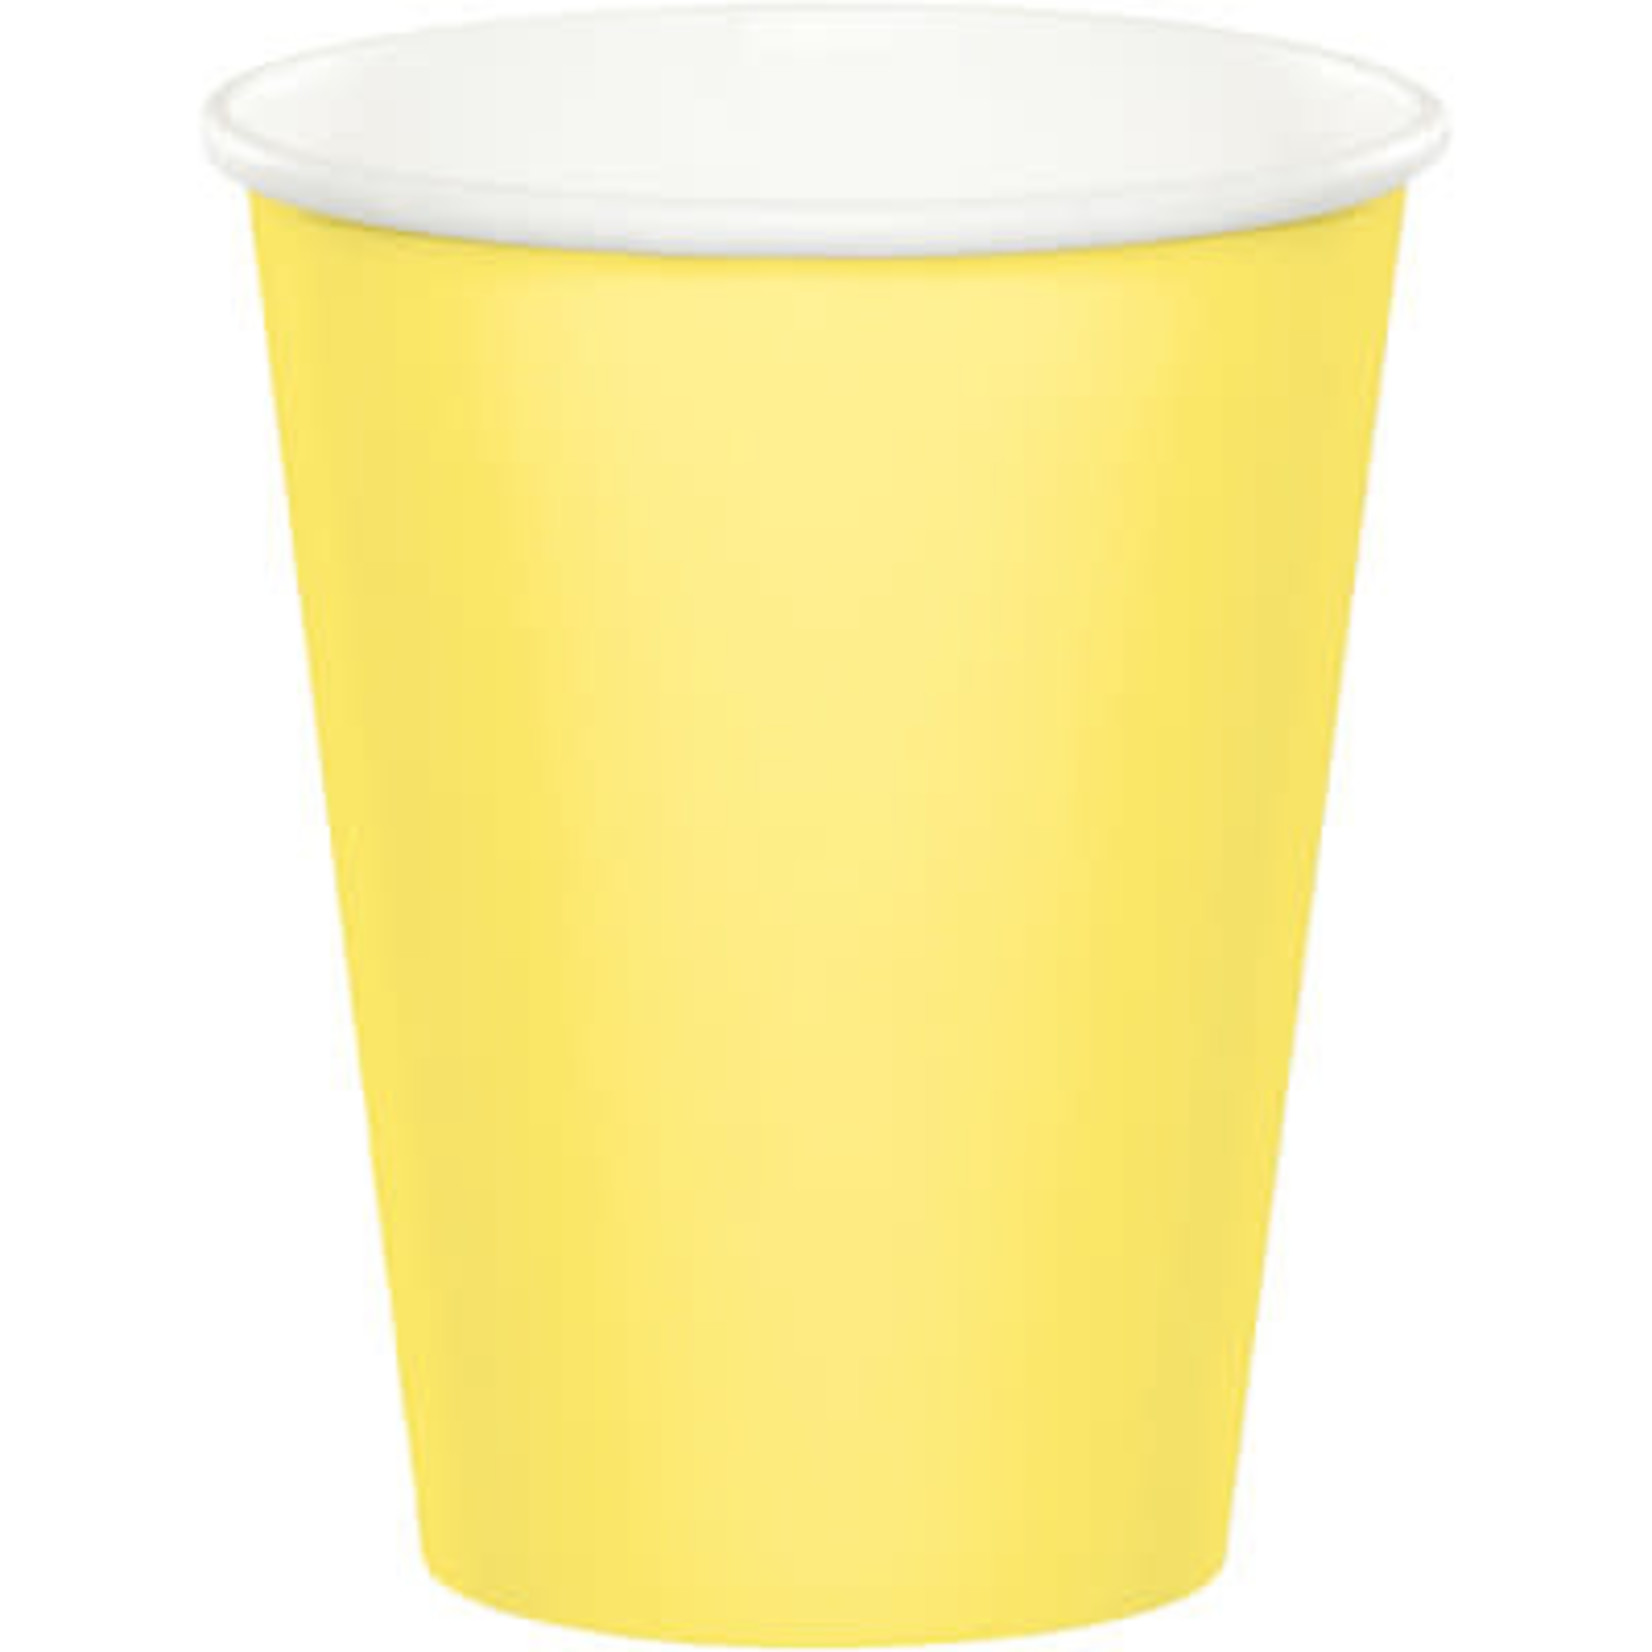 Touch of Color 9oz. Mimosa Yellow Hot/Cold Paper Cups - 24ct.